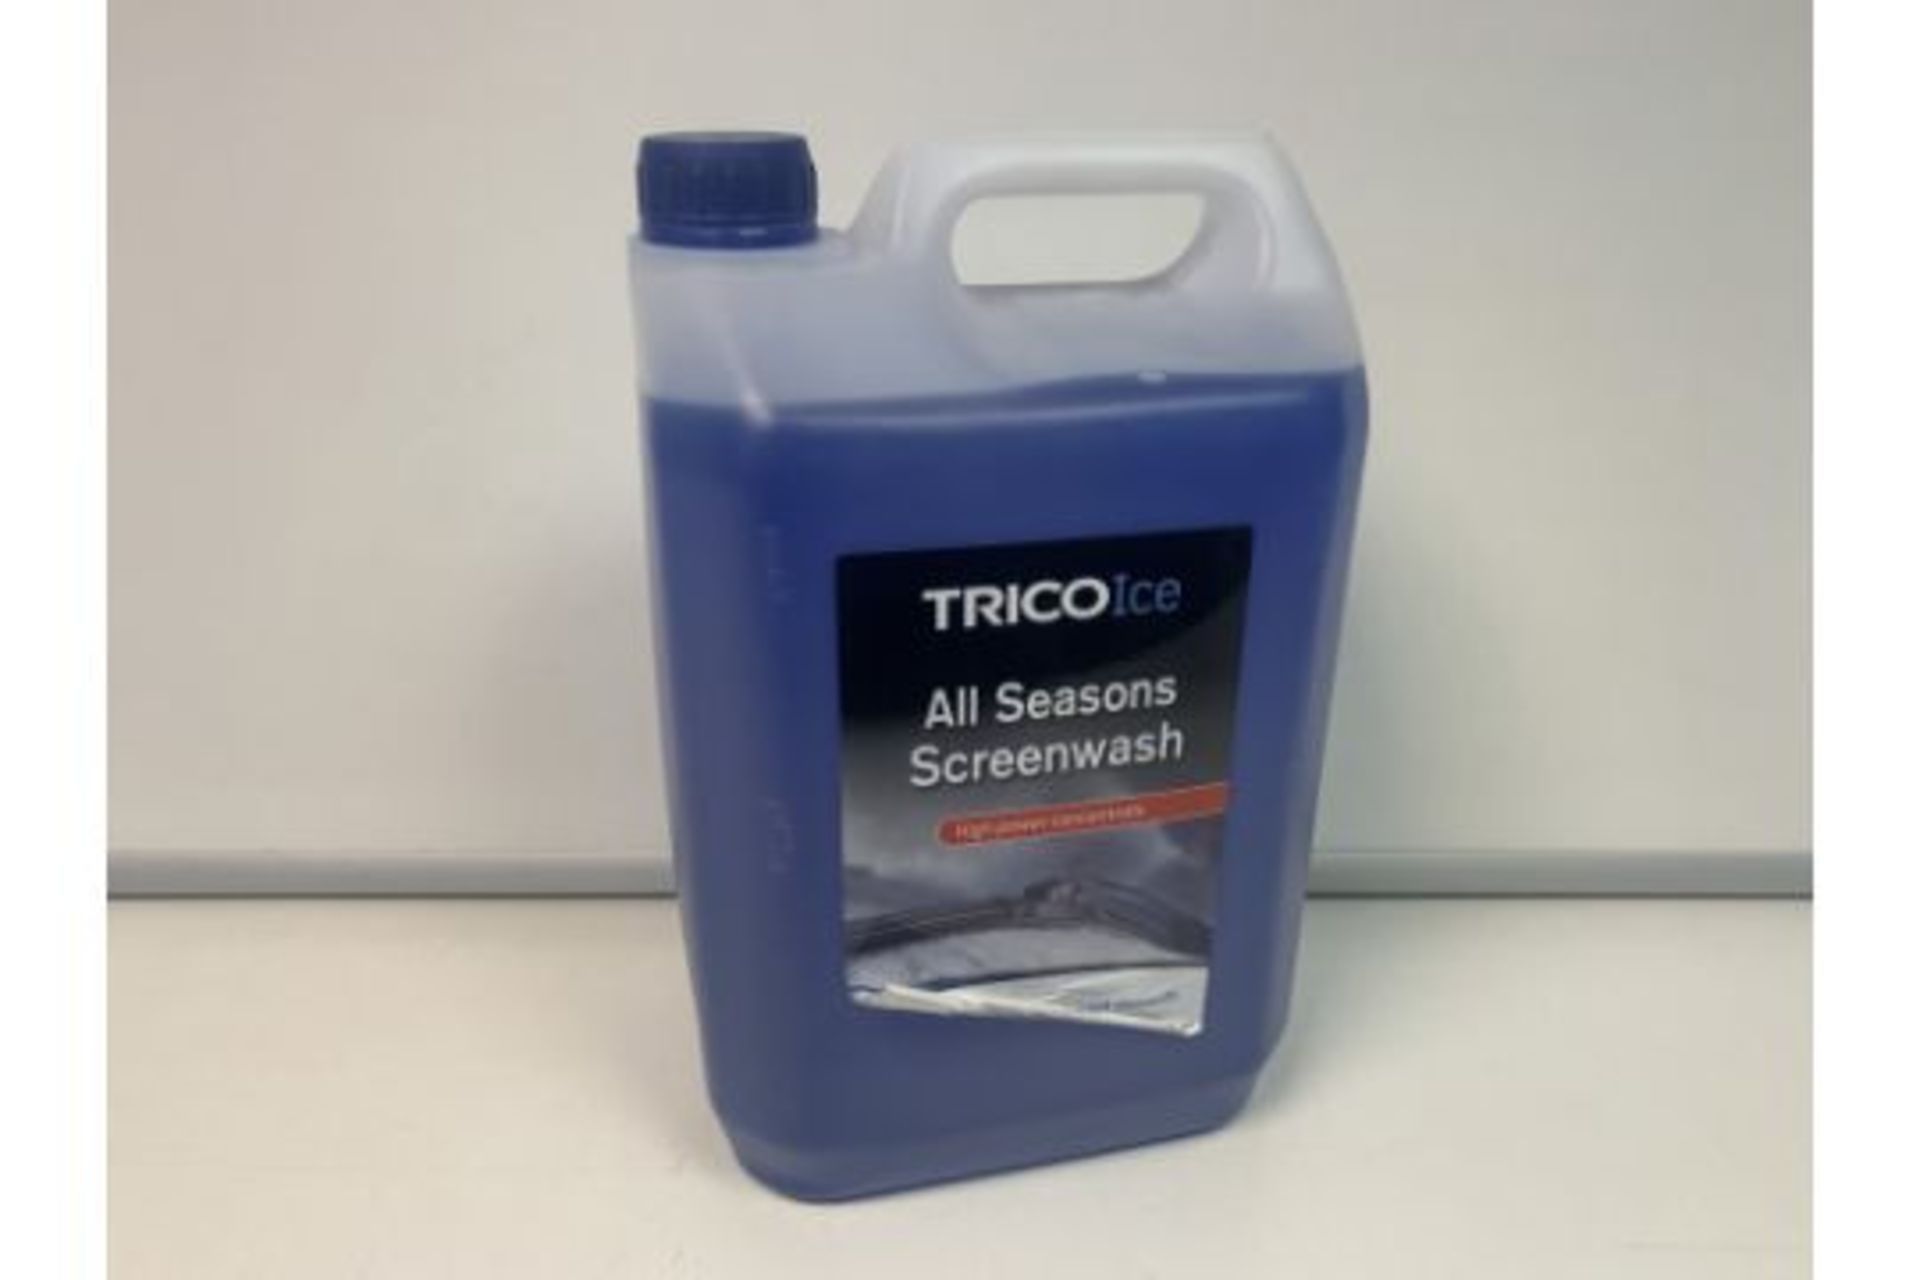 16 X NEW 5L TUBS OF TRICO ICE ALL SEASONS SCREENWASH. HIGH POWER CONCNETRATE. (ROW6)